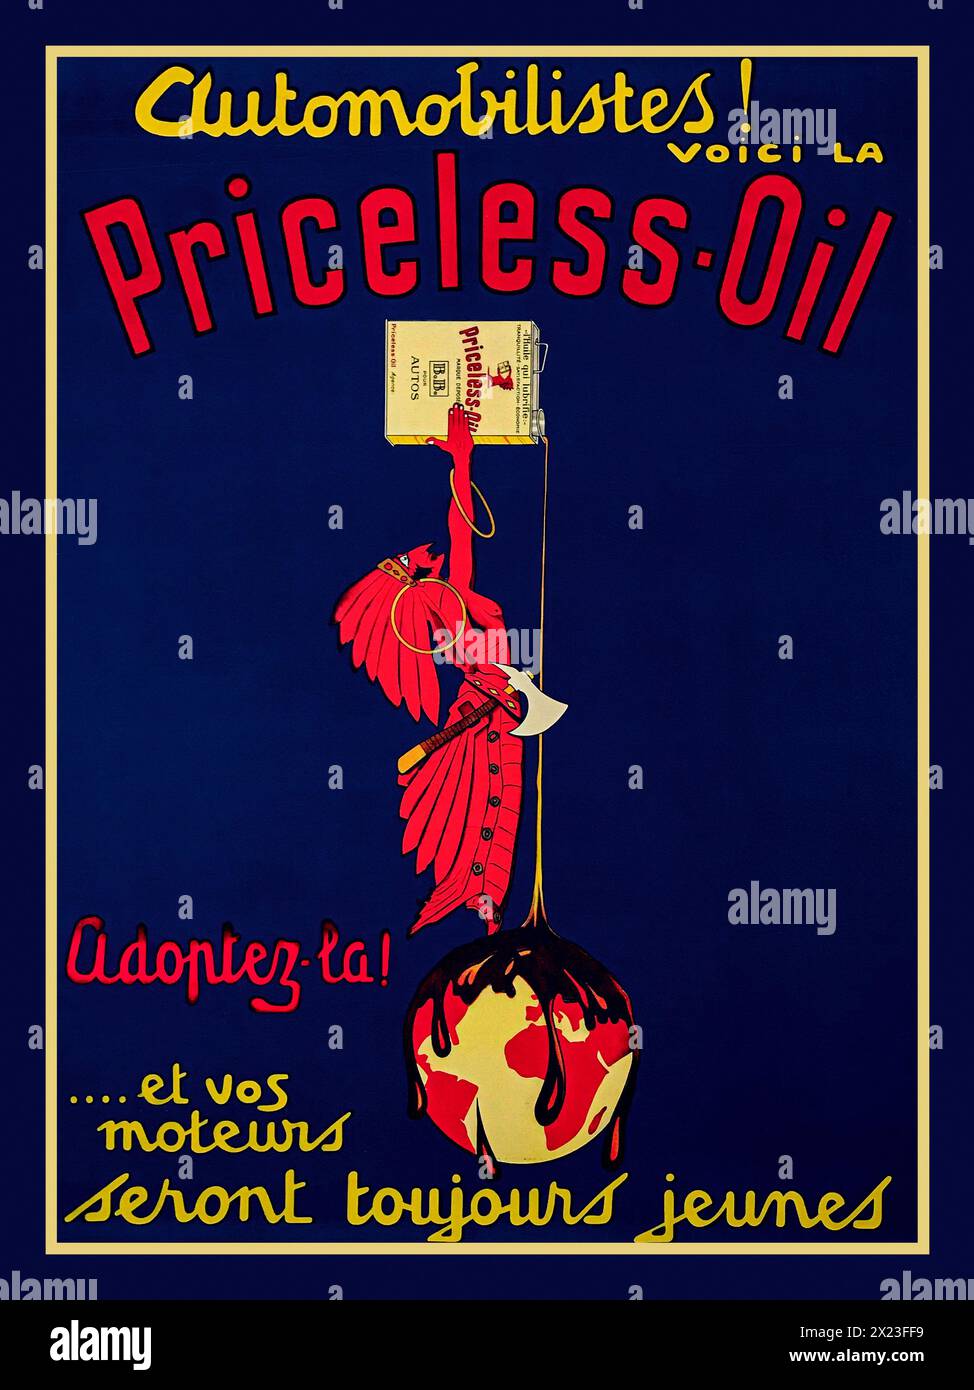 Vintage Oil conservation global use poster. 'Priceless Oil' by Laurencin Original 1928 Vintage French Motor Oil Advertisement Lithograph Poster. Features the profile of a native American in red holding up a can of oil as it pours on to the earth against a blue background. Antique Poster by Laurencin Circa: 1928  France Stock Photo